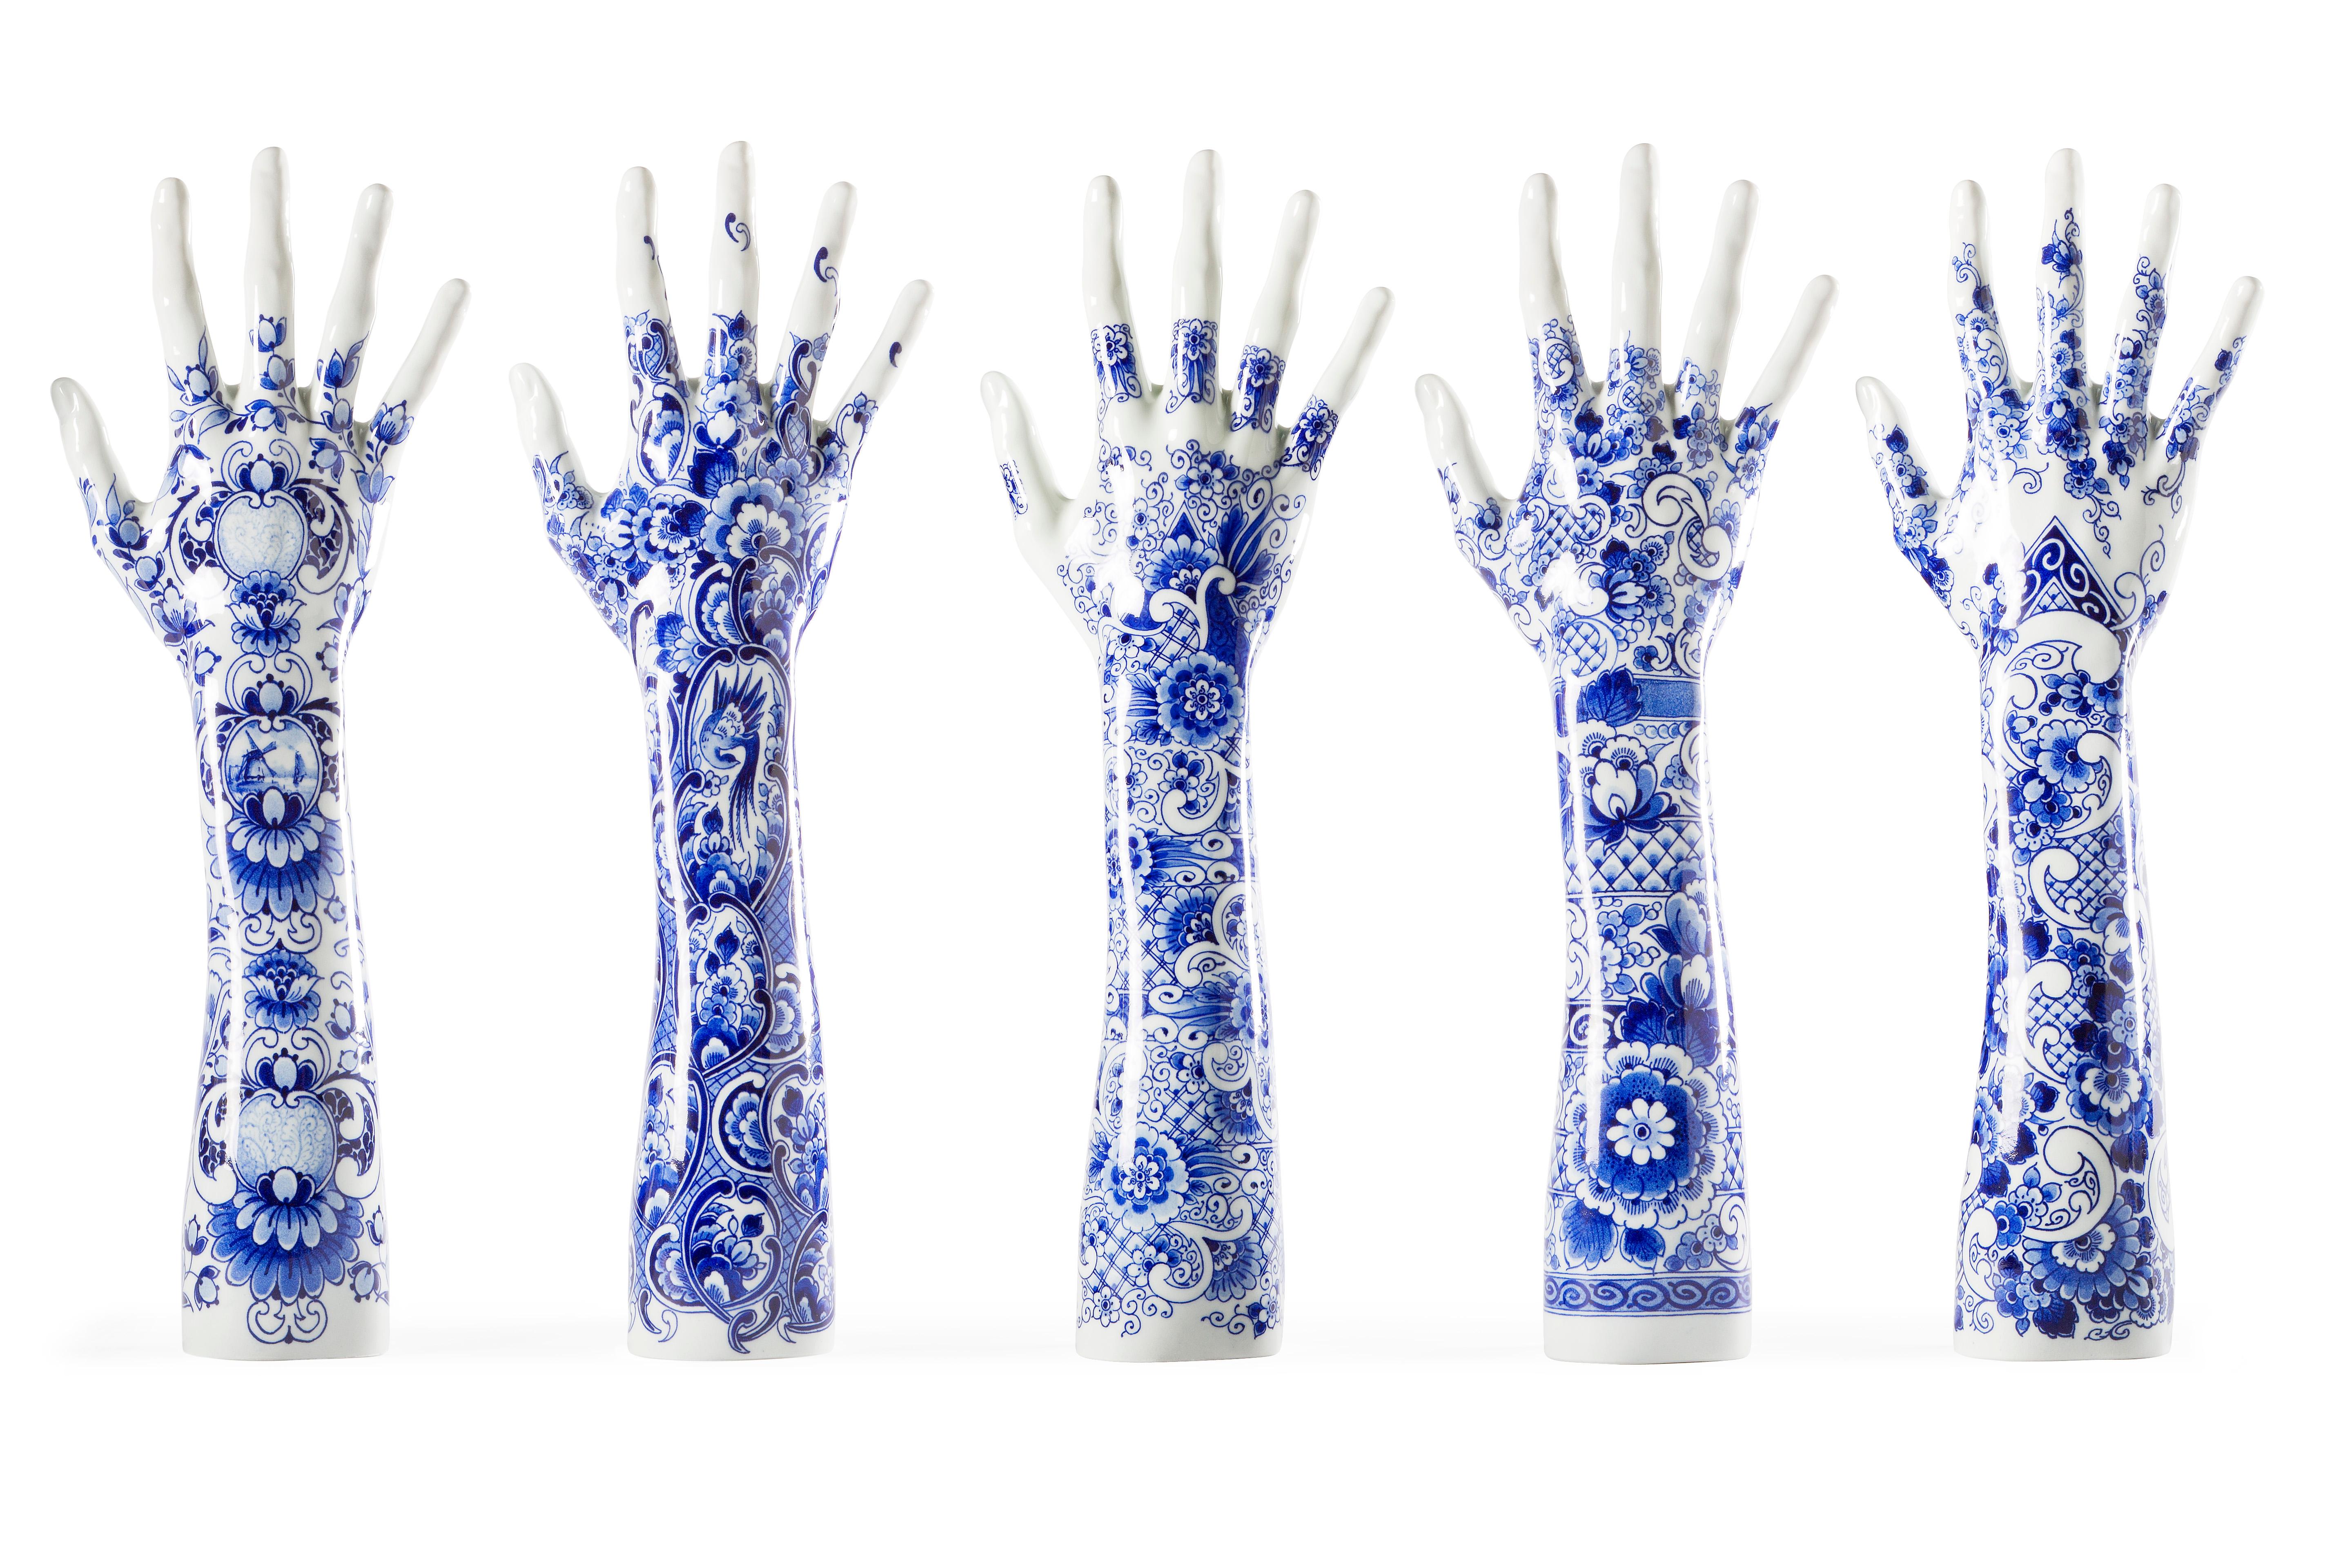 Fragile Fingers on a Grand Piano, by Marcel Wanders, 2013, Unique, Pair #5/6 1